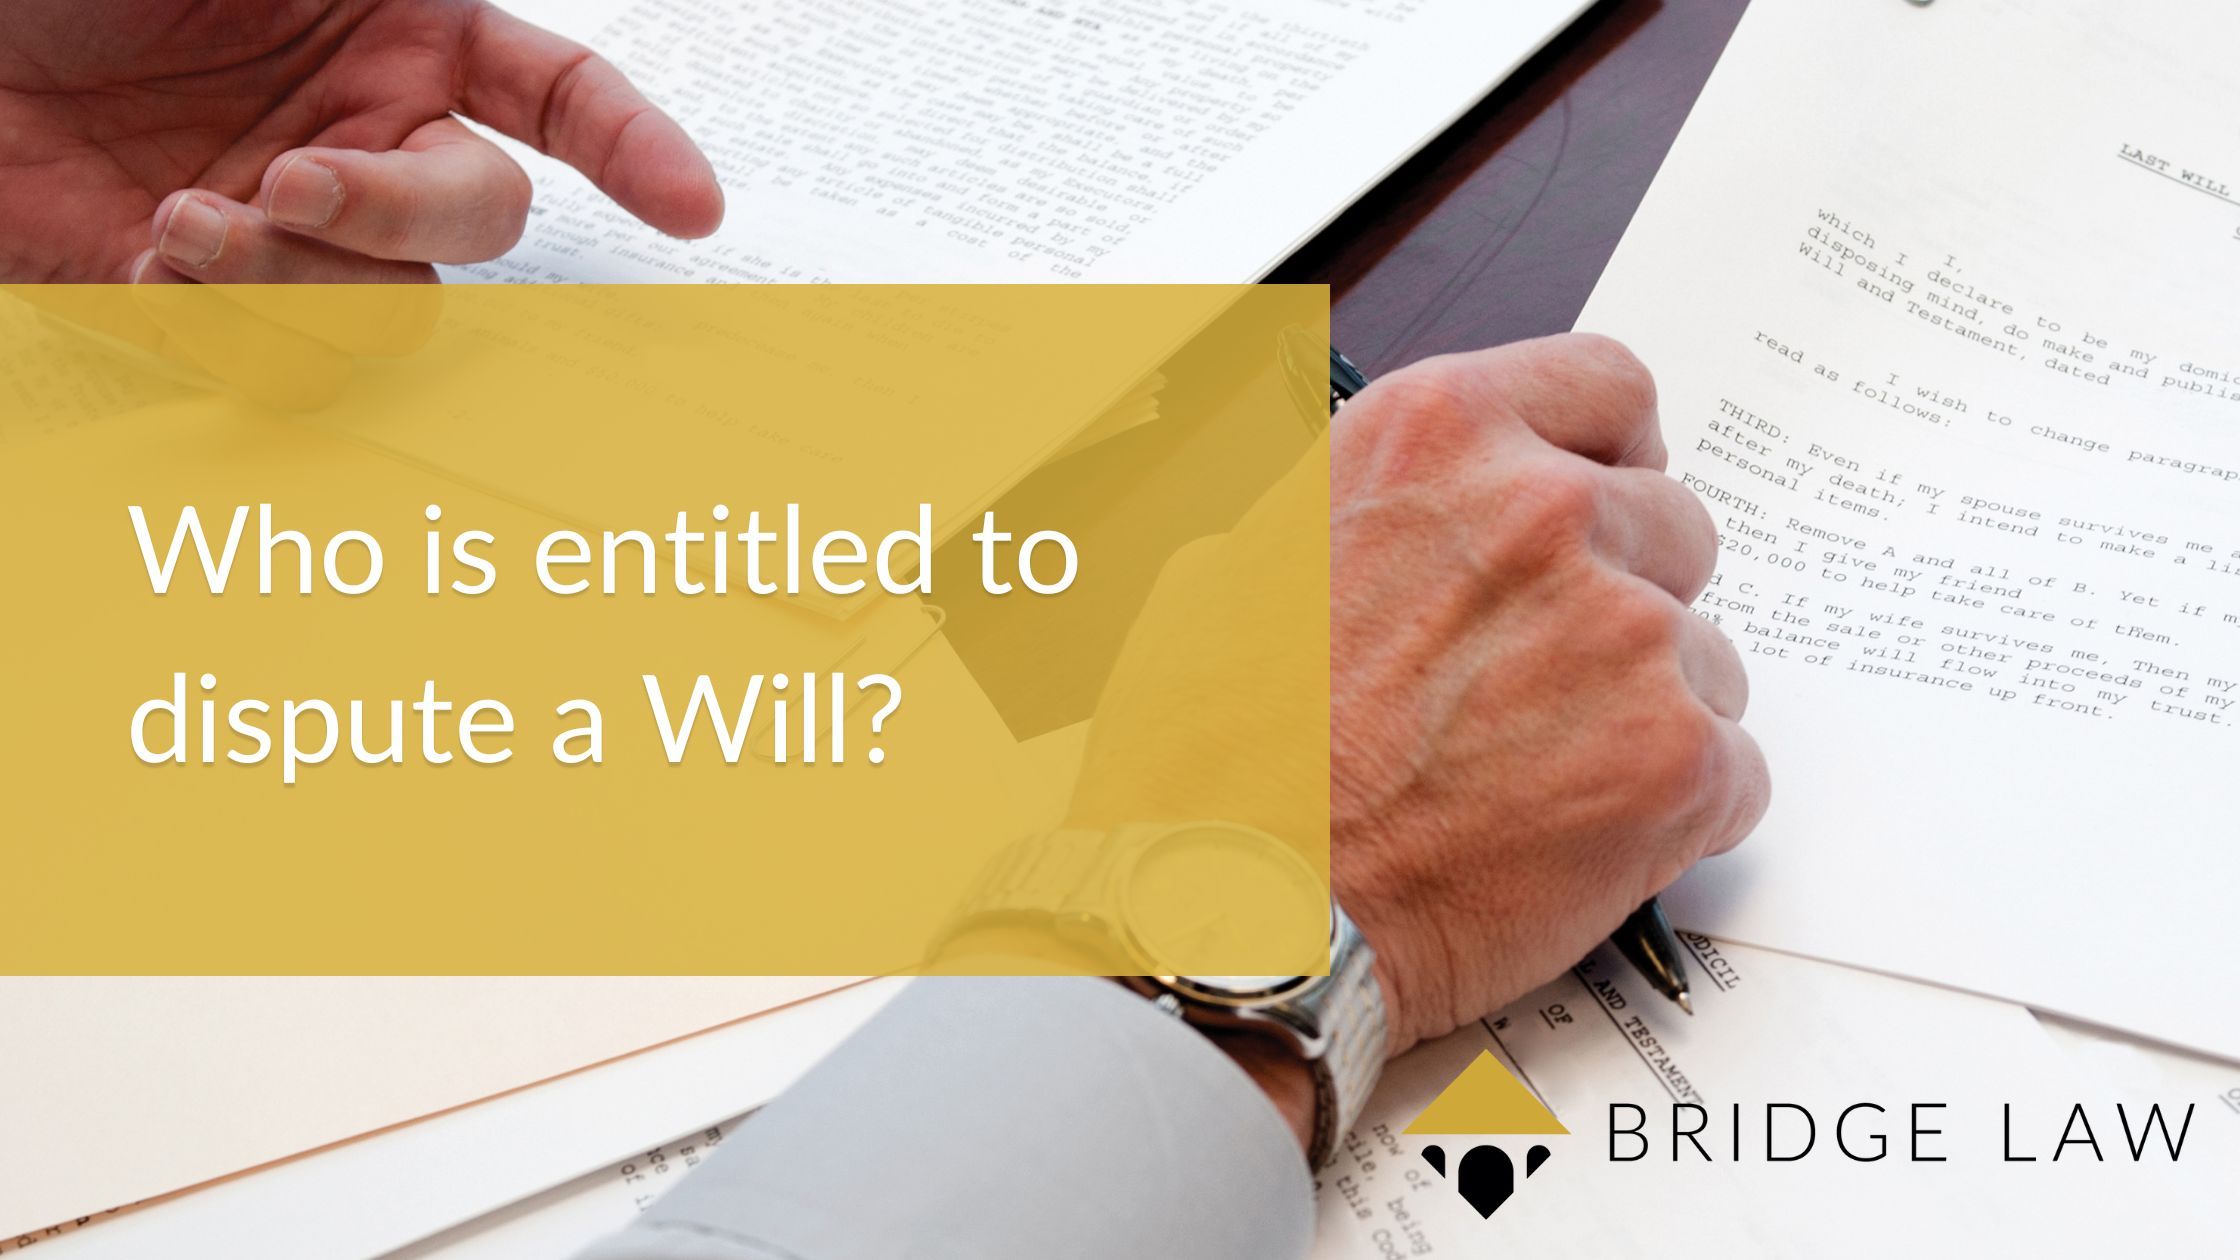 Bridge law blog banner image 'who is entitled to dispute a Will?' with man looking at documents